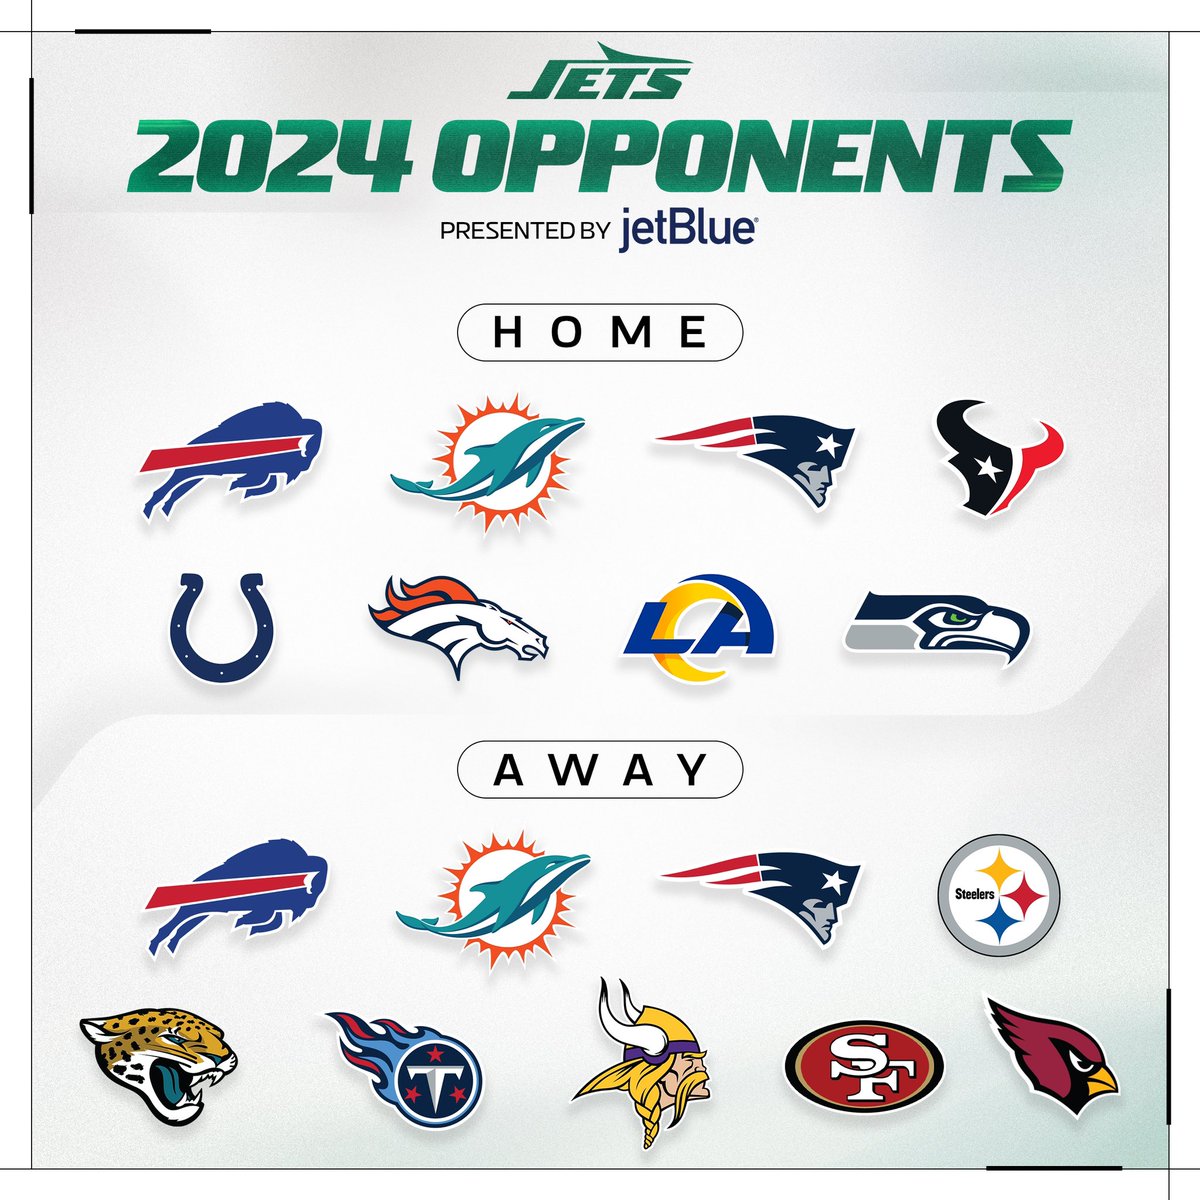 give us your hottest 2024 schedule takes